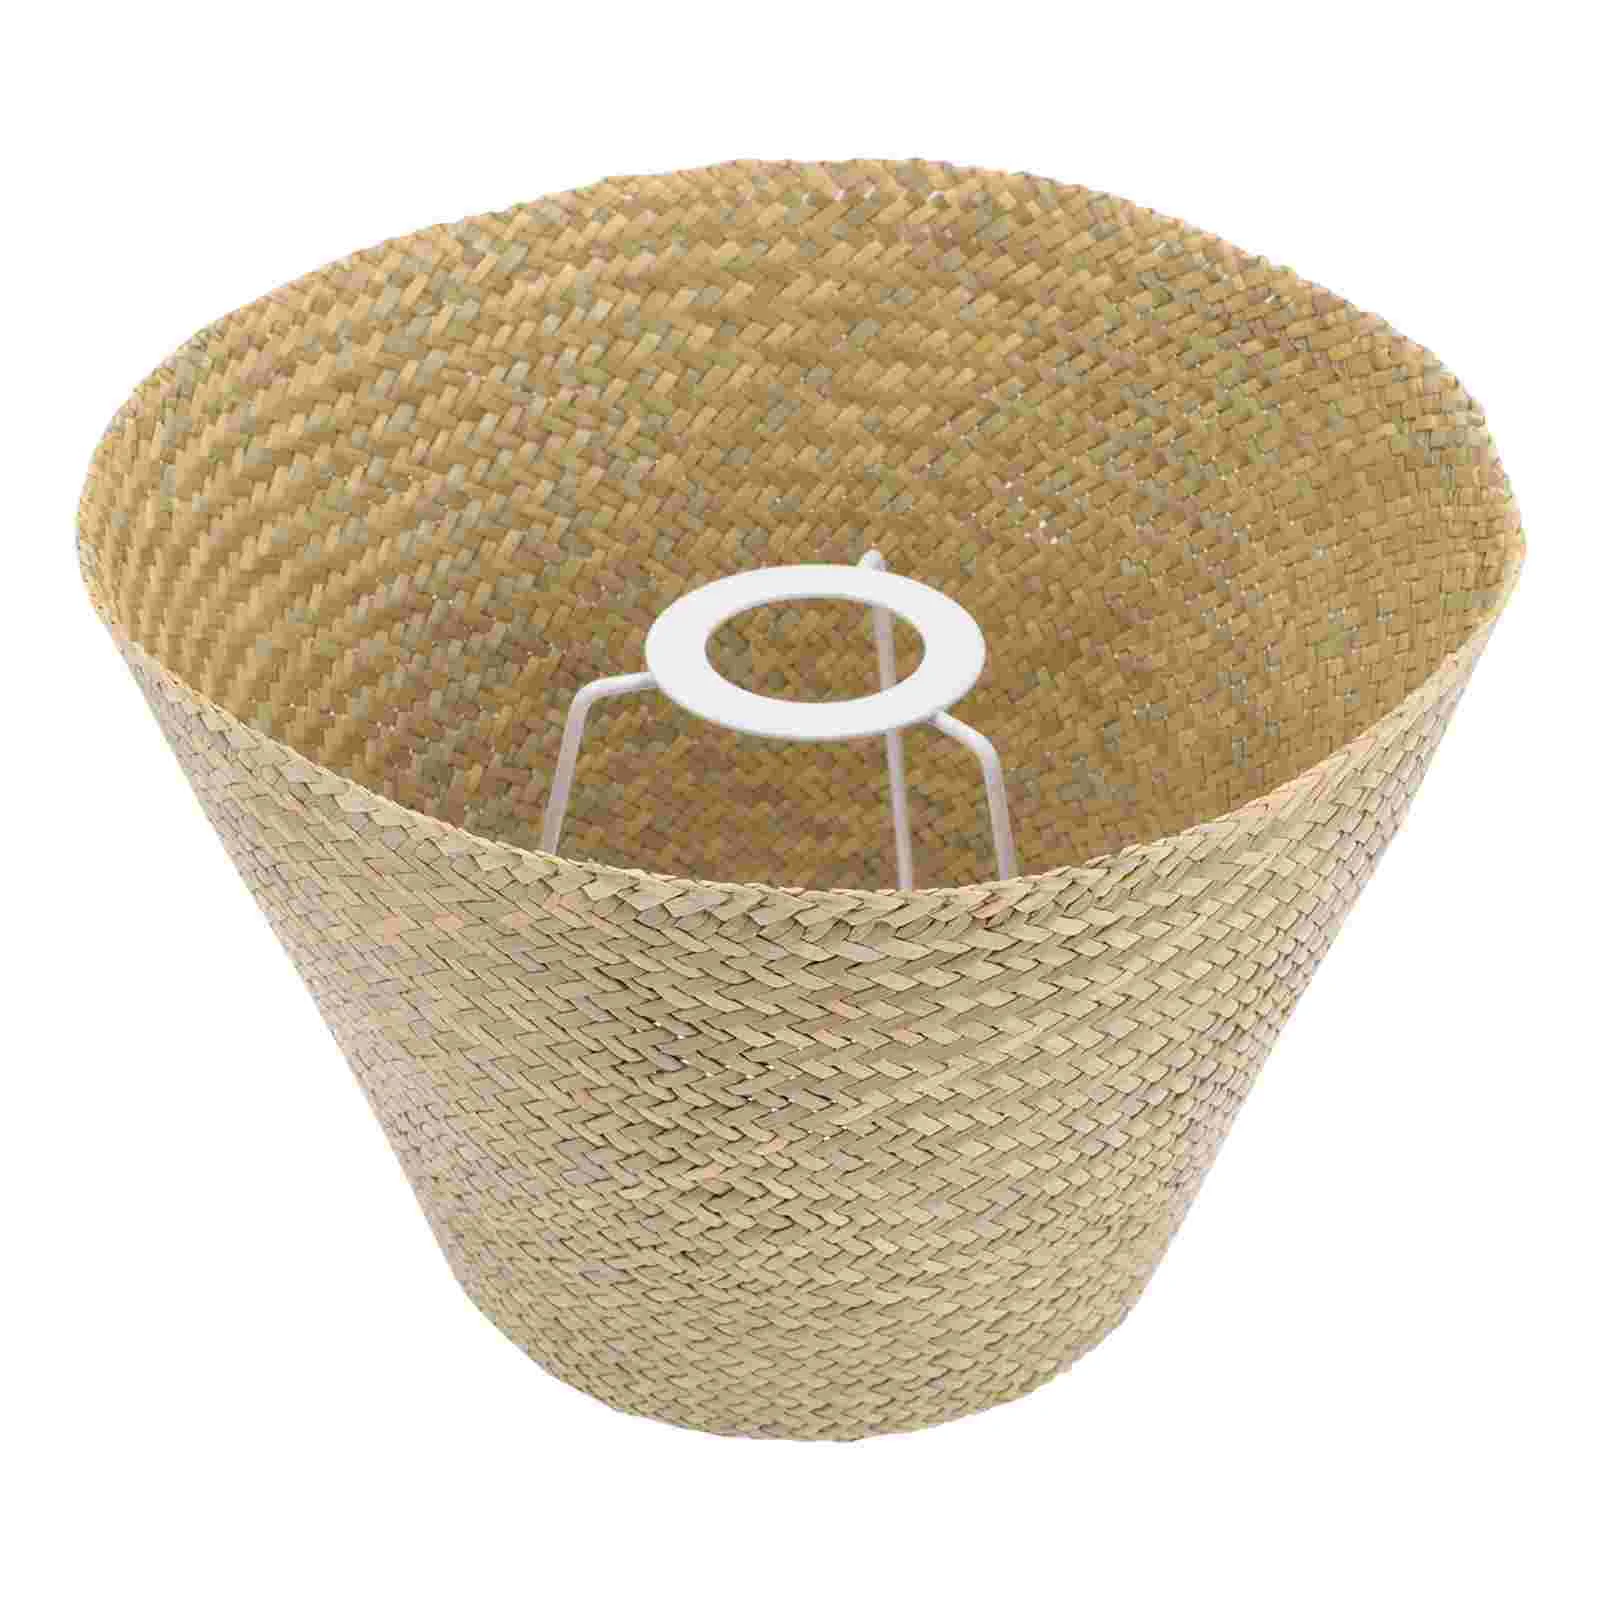 

Rattan Lampshade Vintage Hand Woven Lamp Shade Cover Rustic Hanging Chandelier Shade for Bar Cafe Living Room